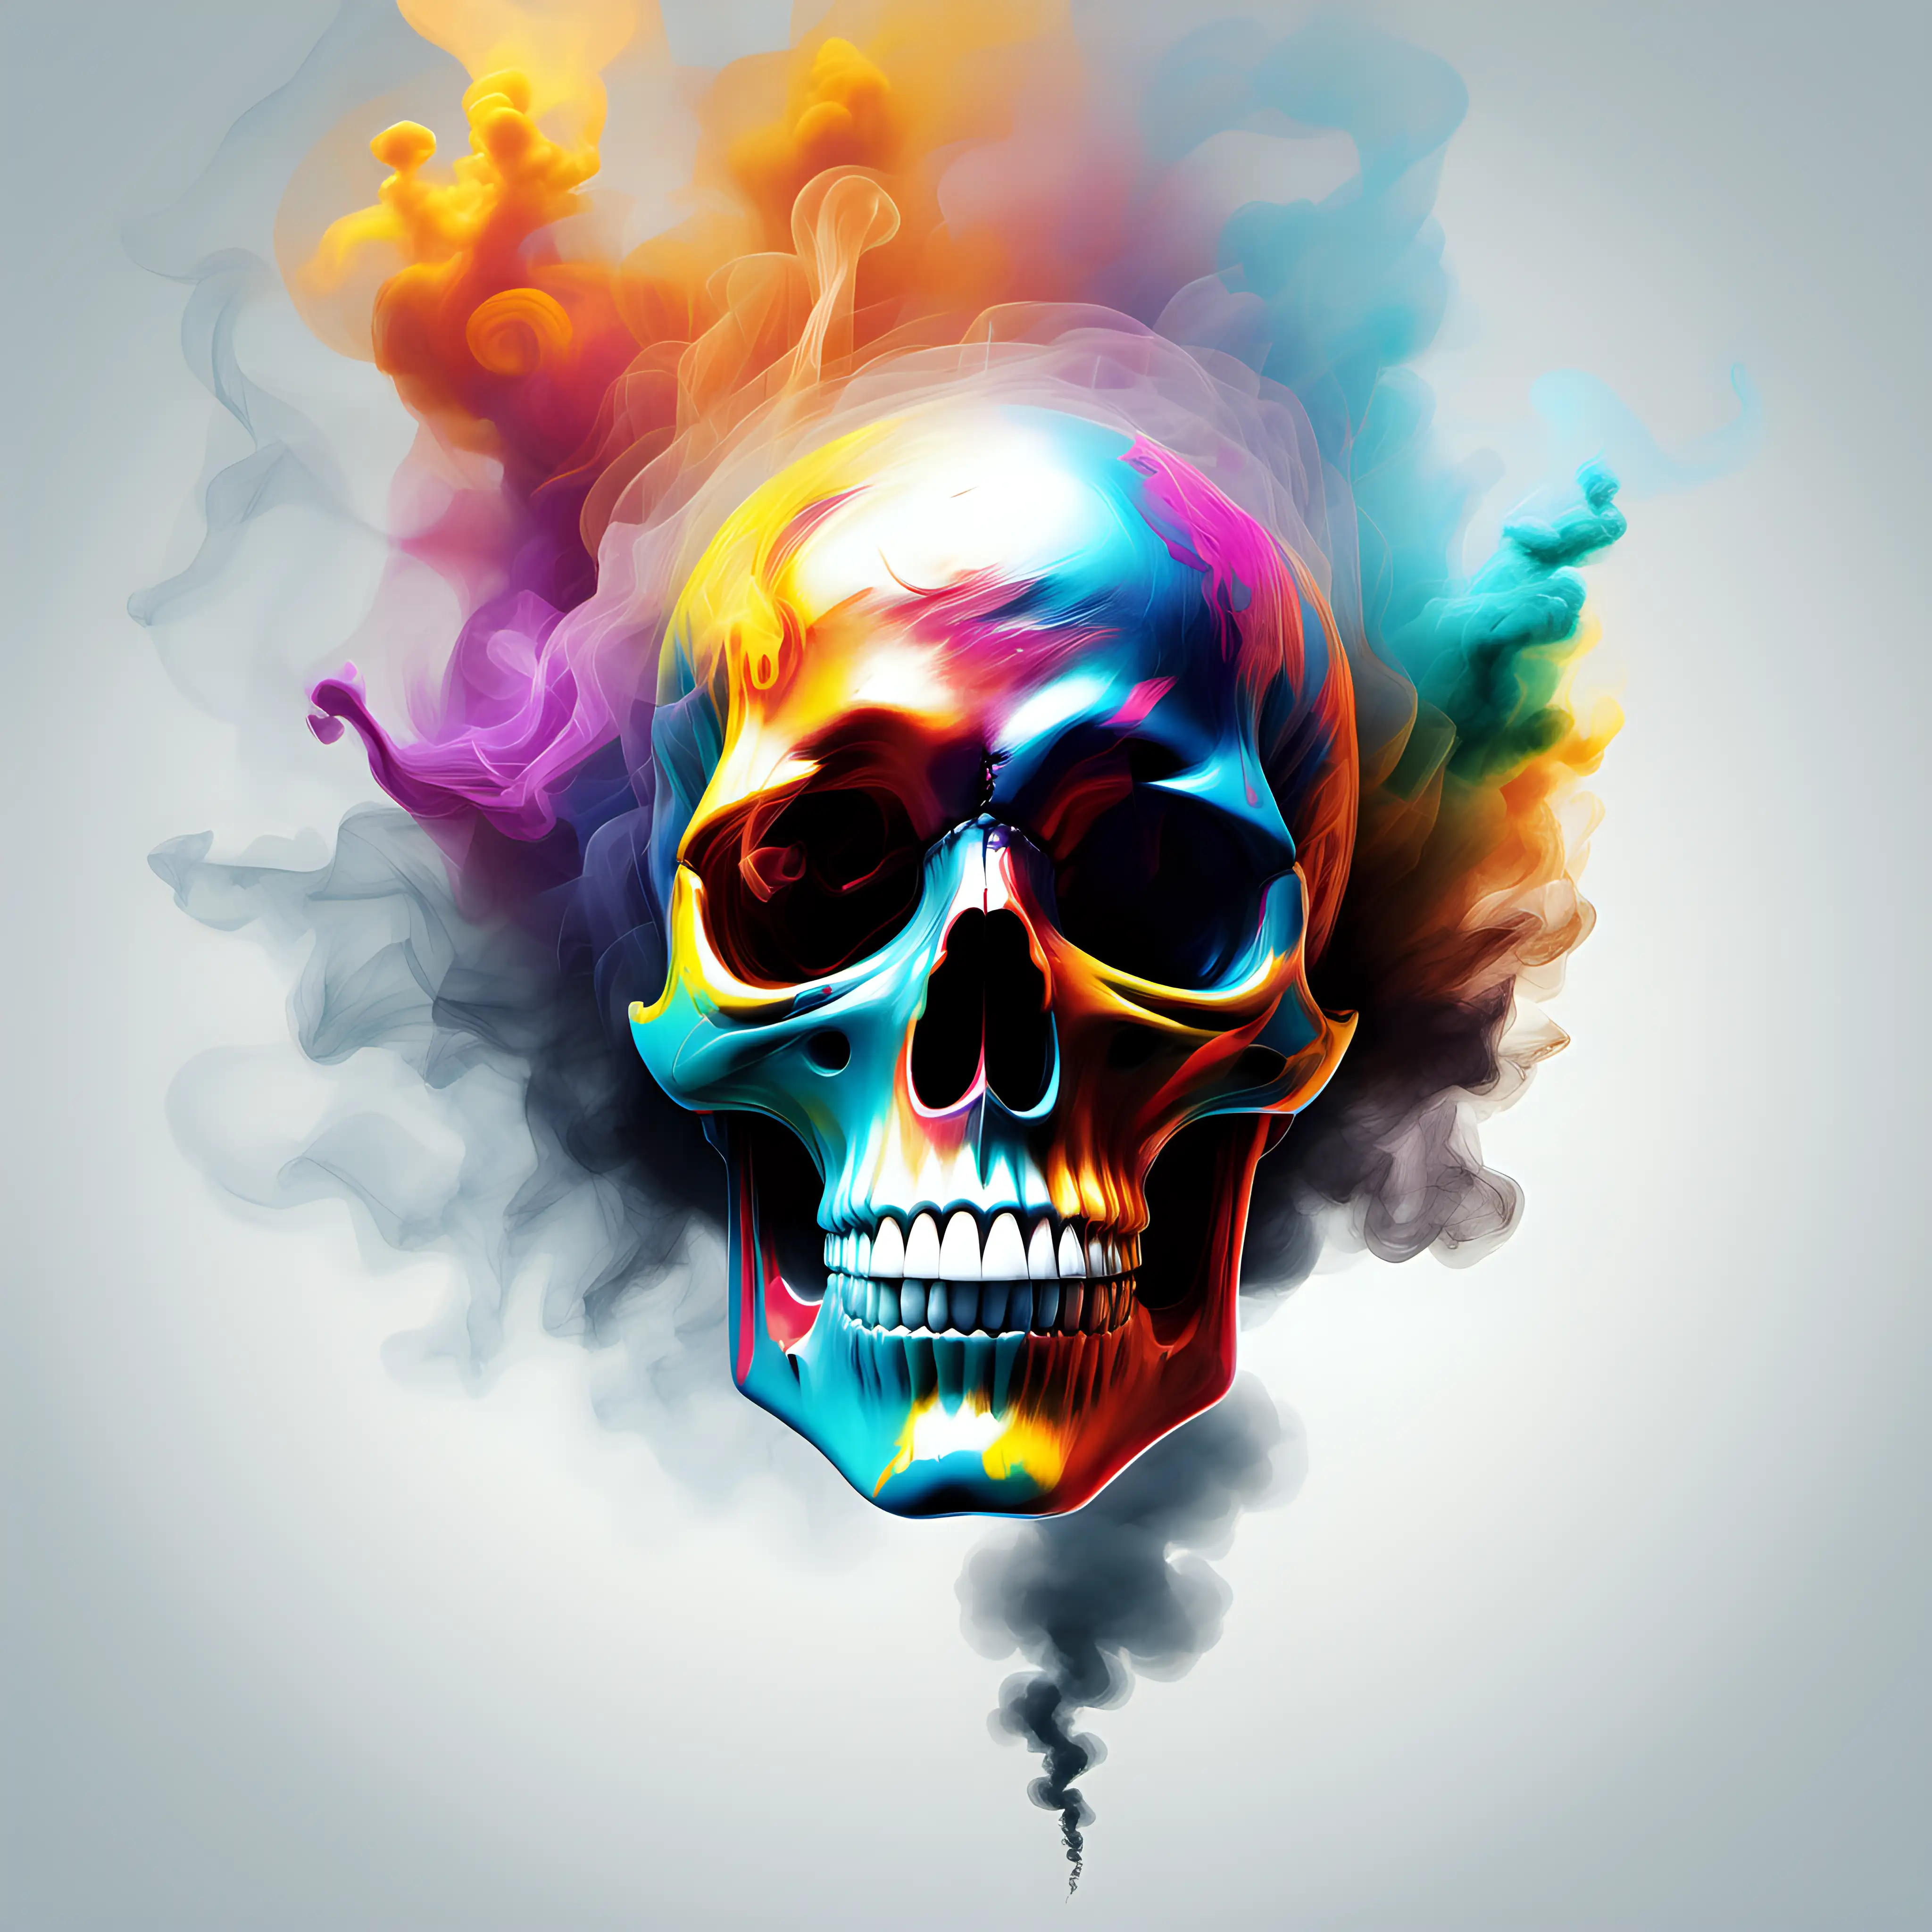 Vibrant Abstract Skull Art Colorful Smoke on White Background